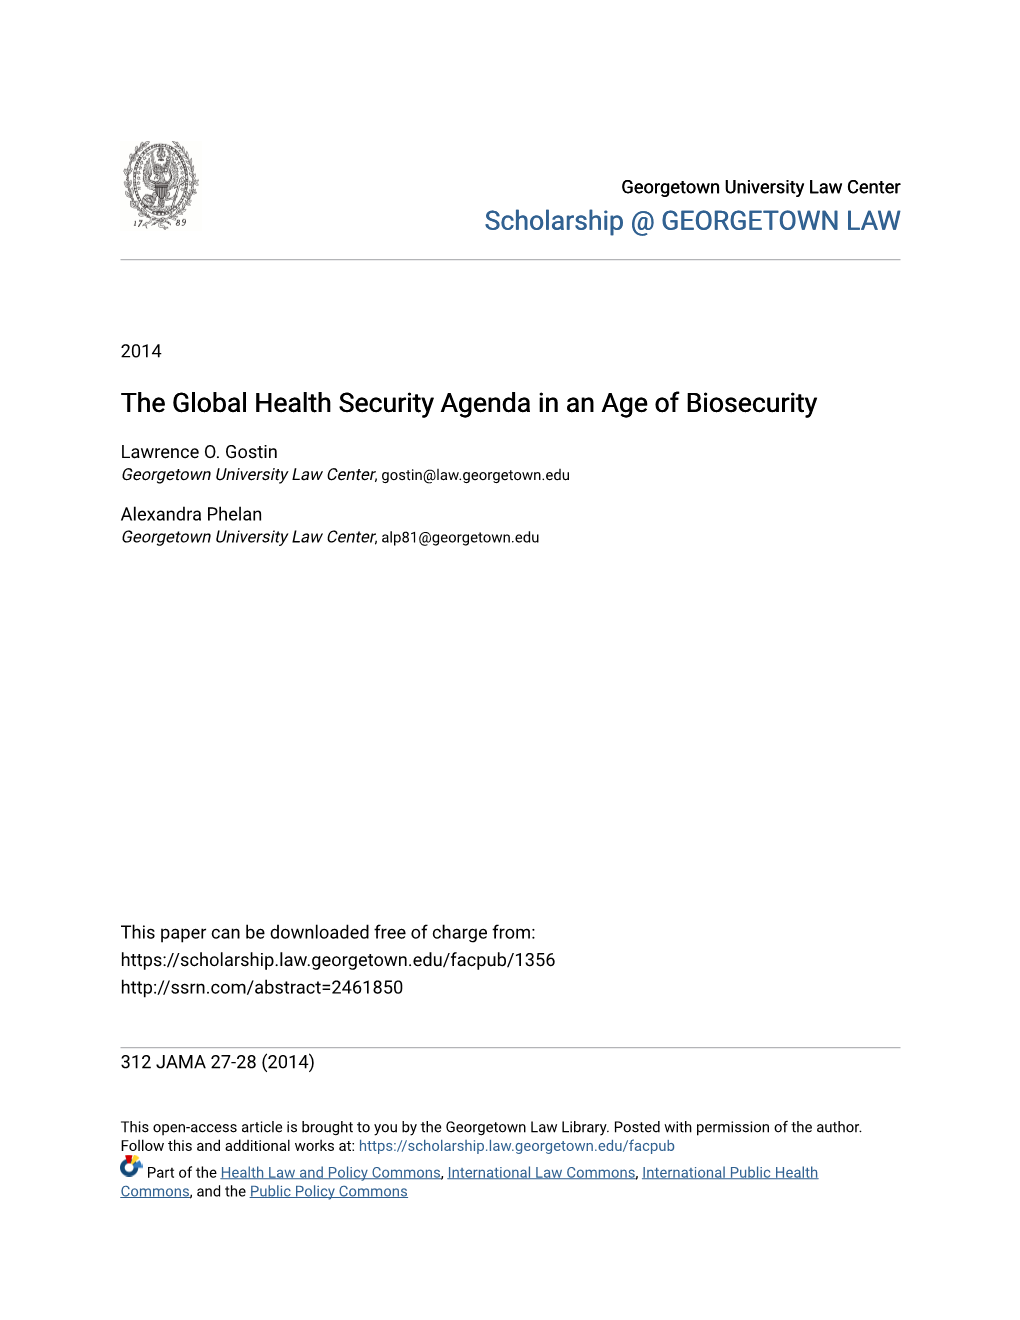 The Global Health Security Agenda in an Age of Biosecurity